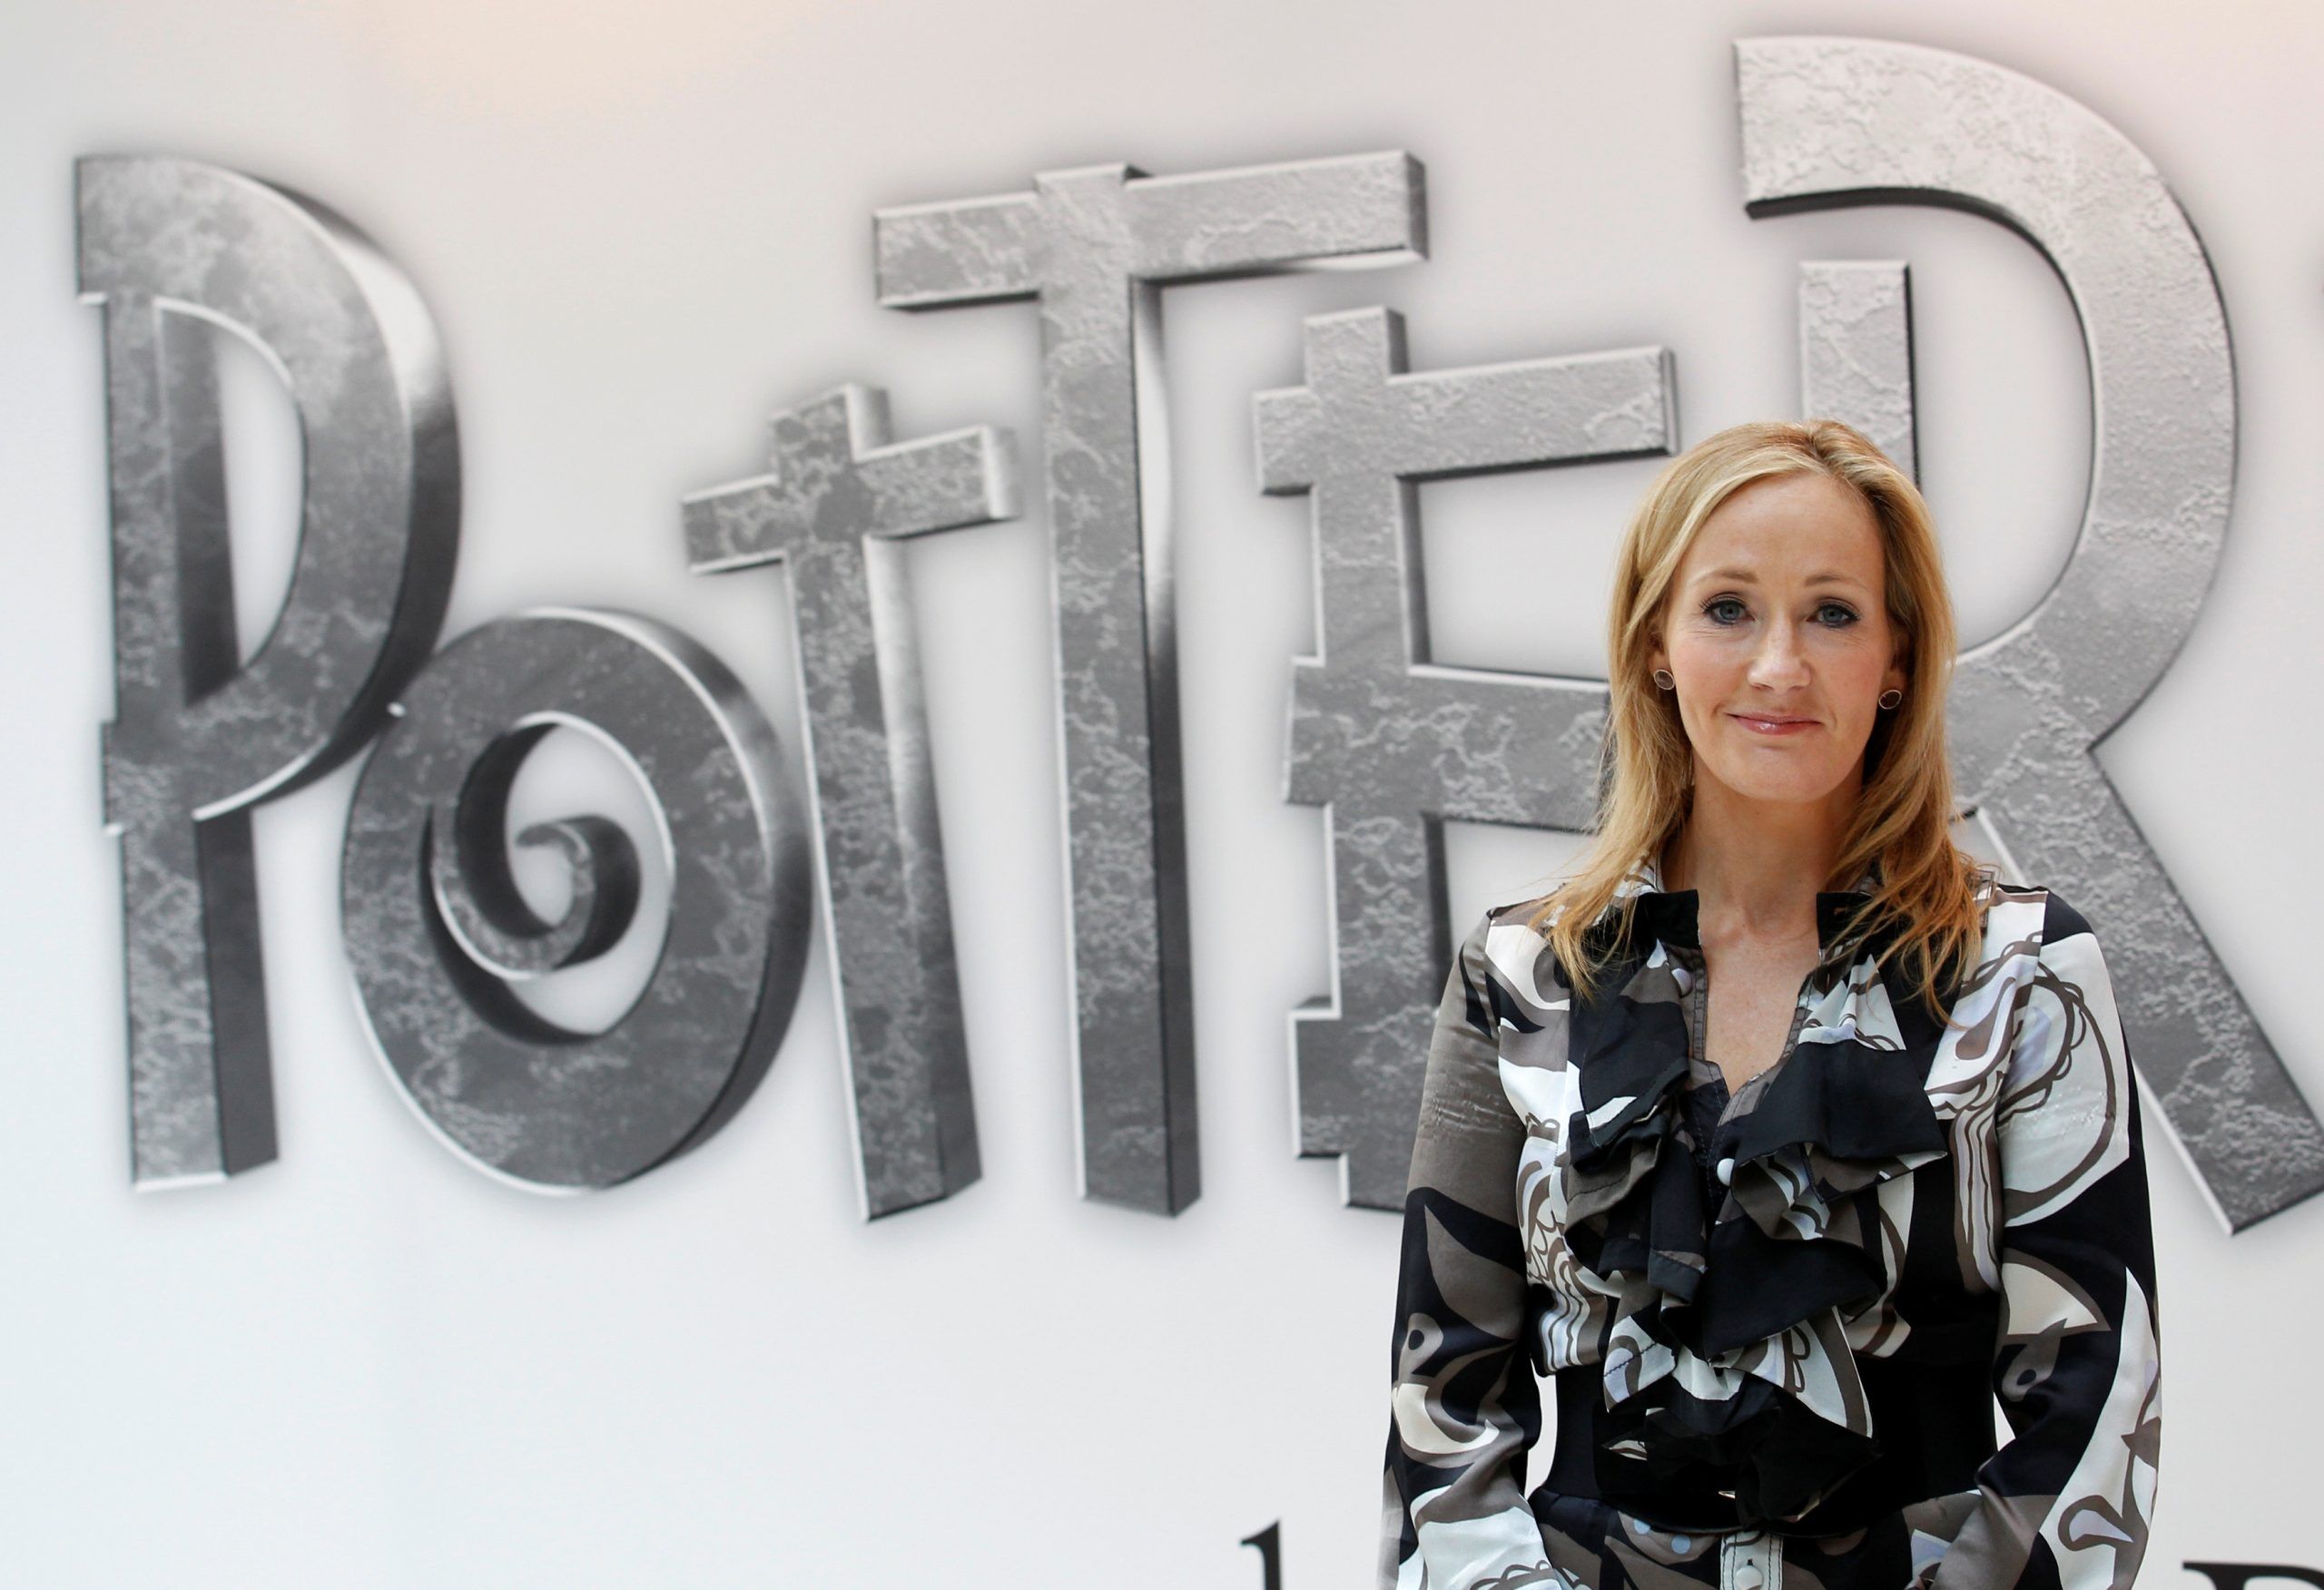 FILE PHOTO: British author JK Rowling, creator of the Harry Potter series. REUTERS/Suzanne Plunkett